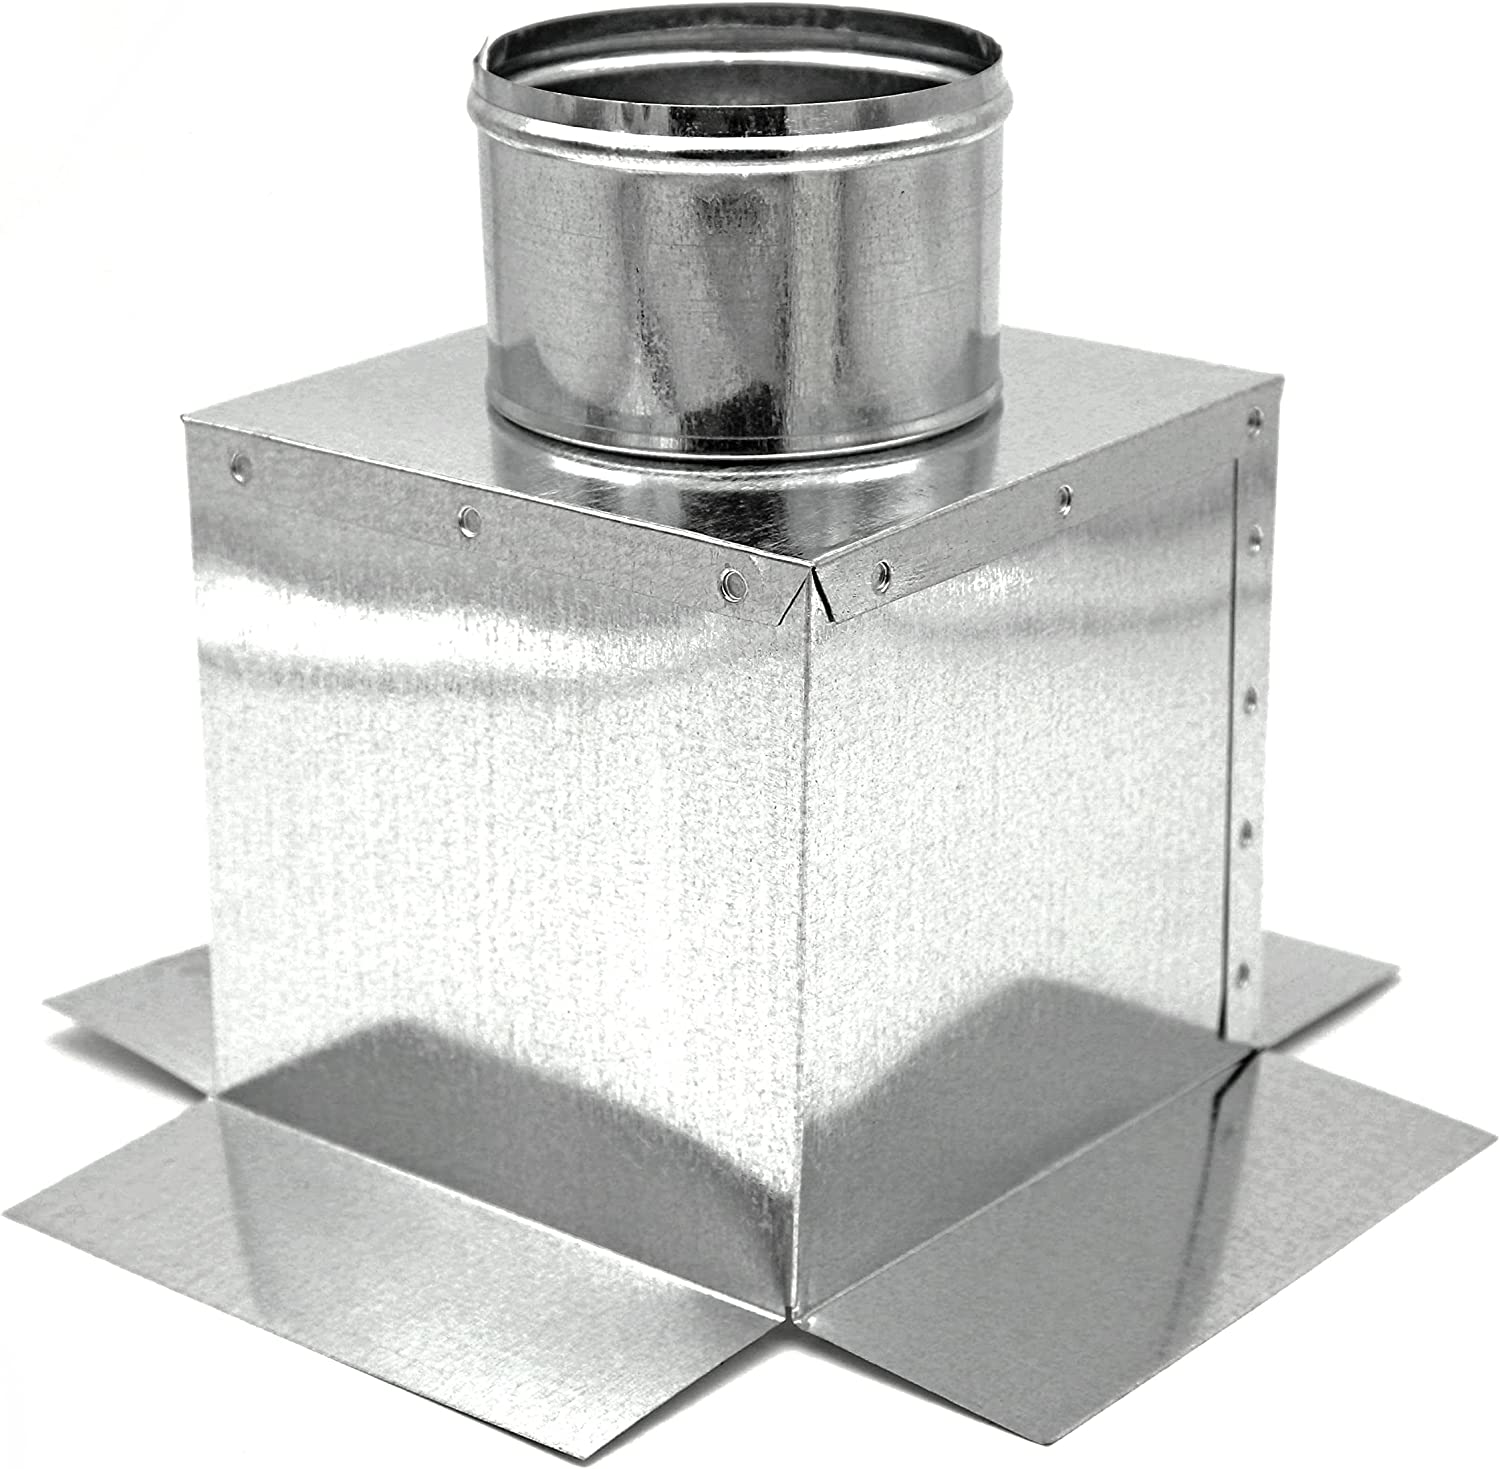 HVAC Plenum Ceiling Box | Top Ceiling Box | 8" X 8" X 8" Galvanized Steel Metal Ceiling Box is Compatible with Duct 8"